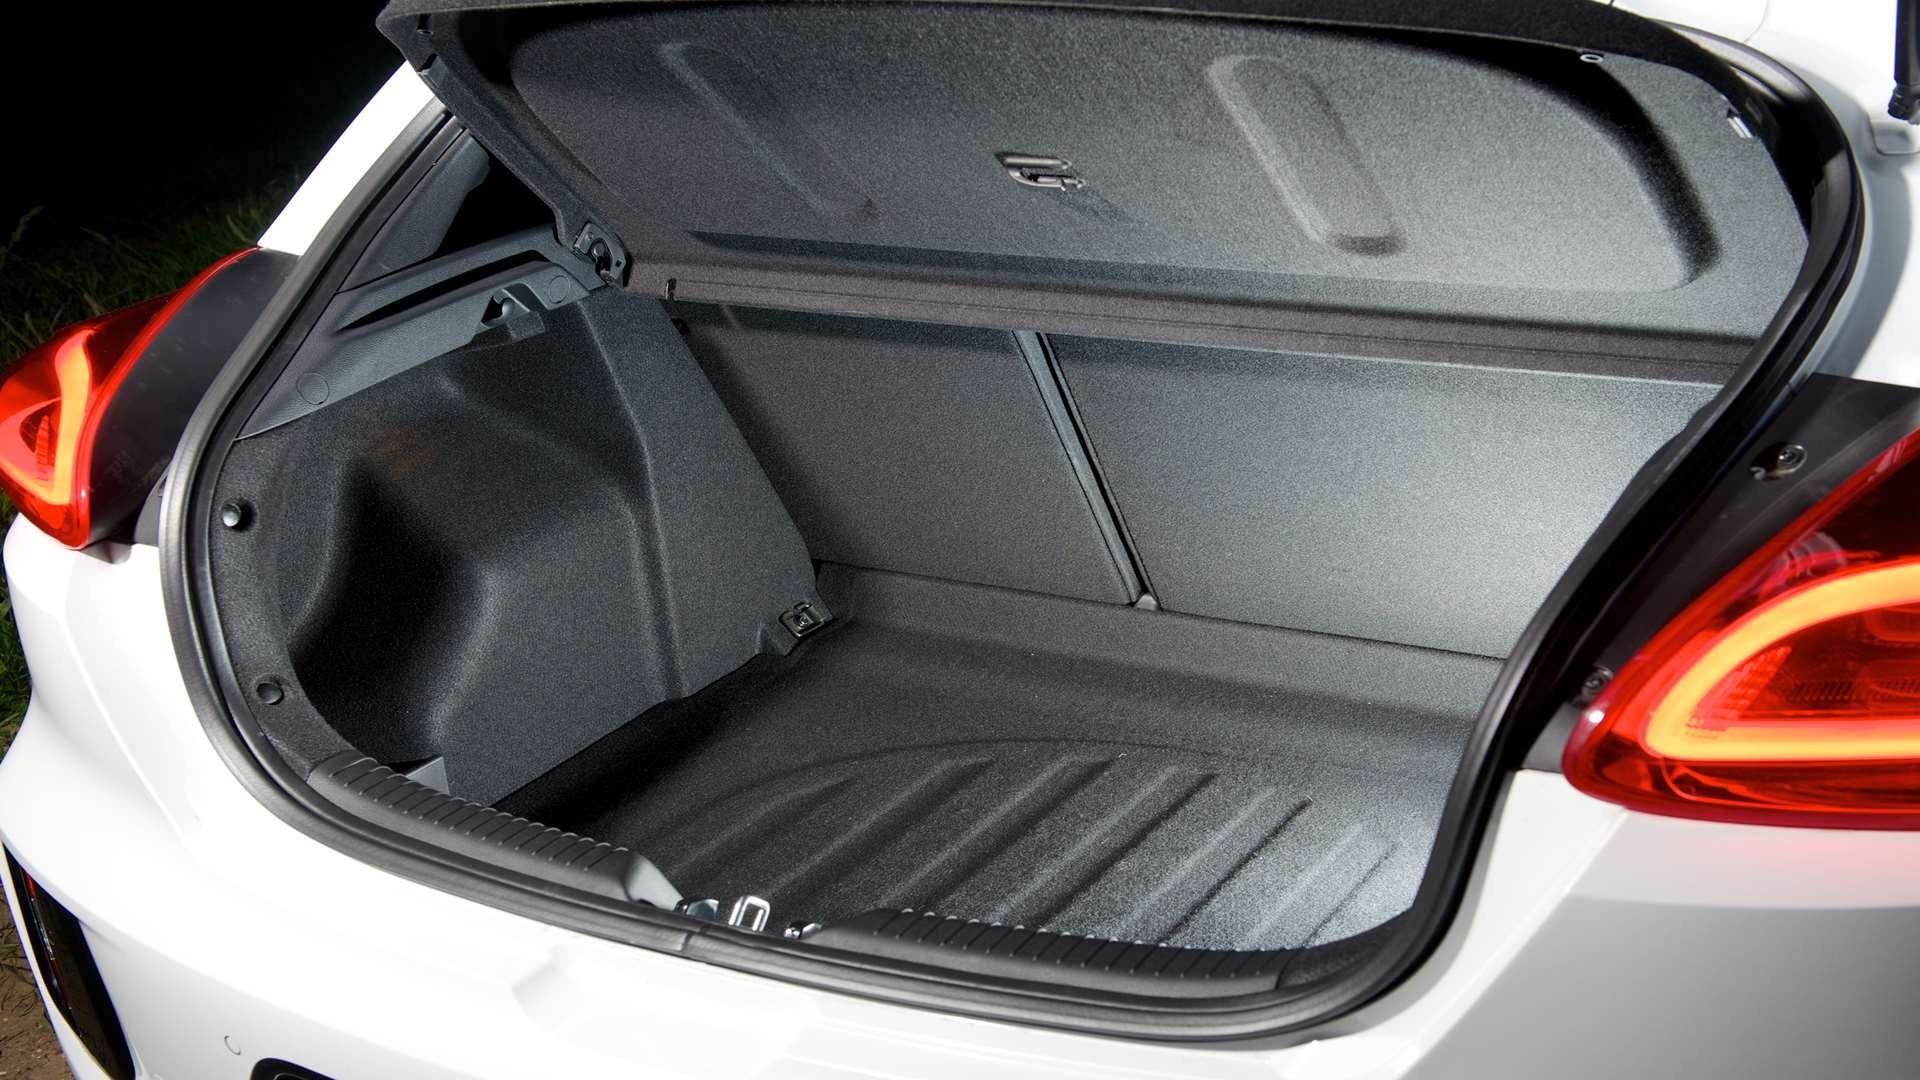 The boot will hold 380-litres of your luggage with the rear sears in place